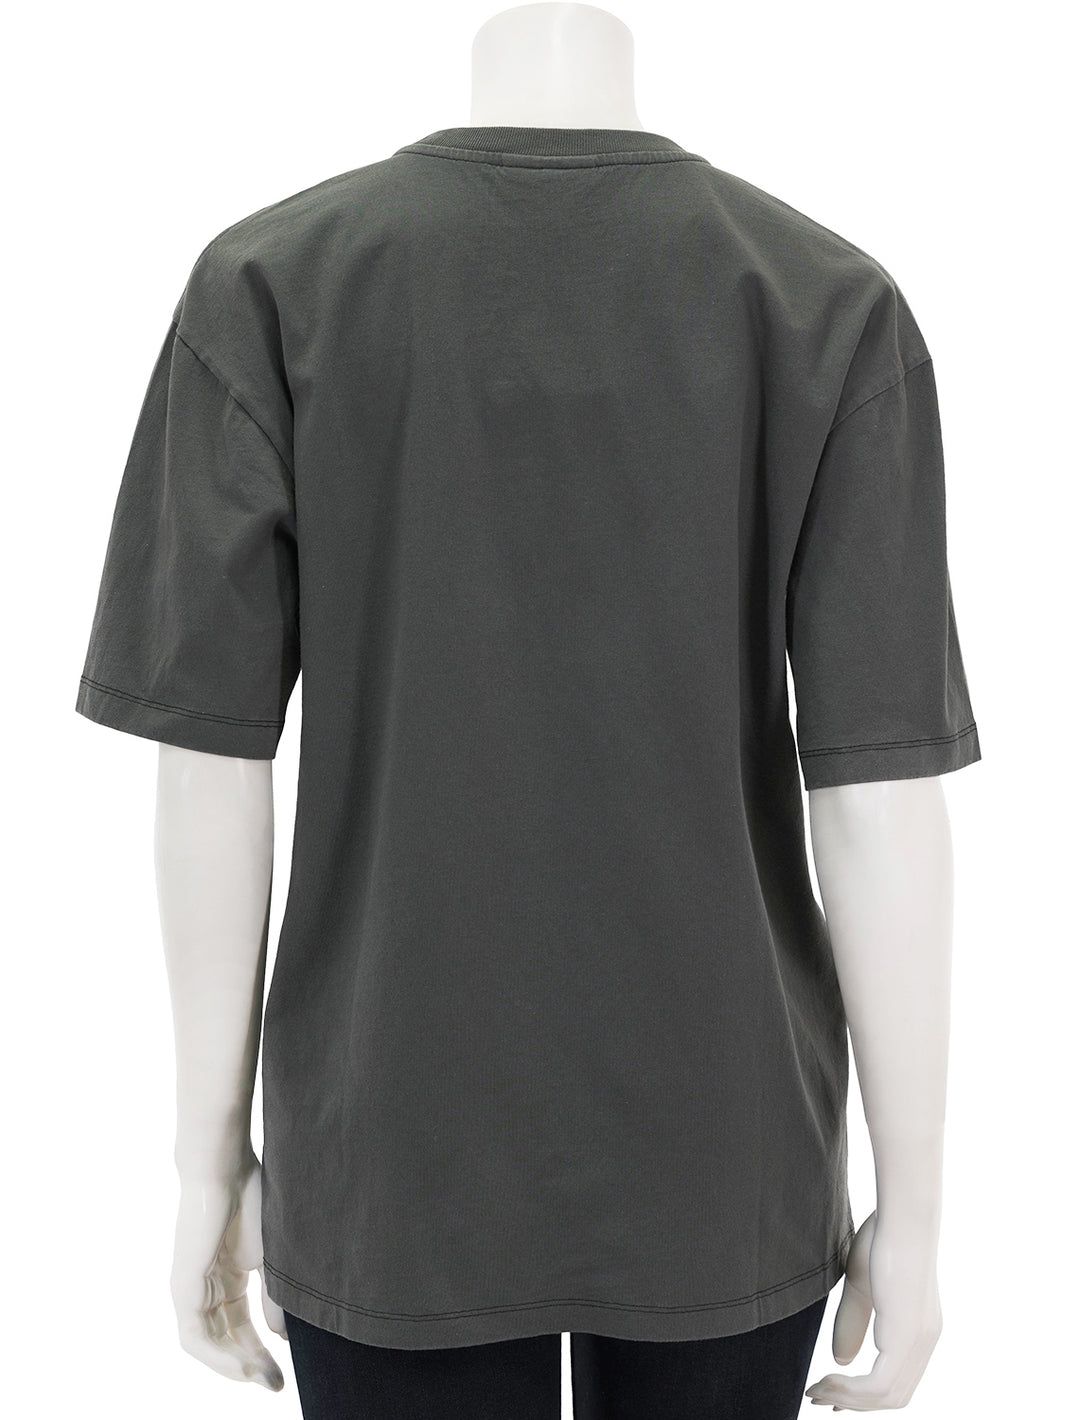 Back view of GANNI's future heavy jersey lamb tee in volcanic ash.